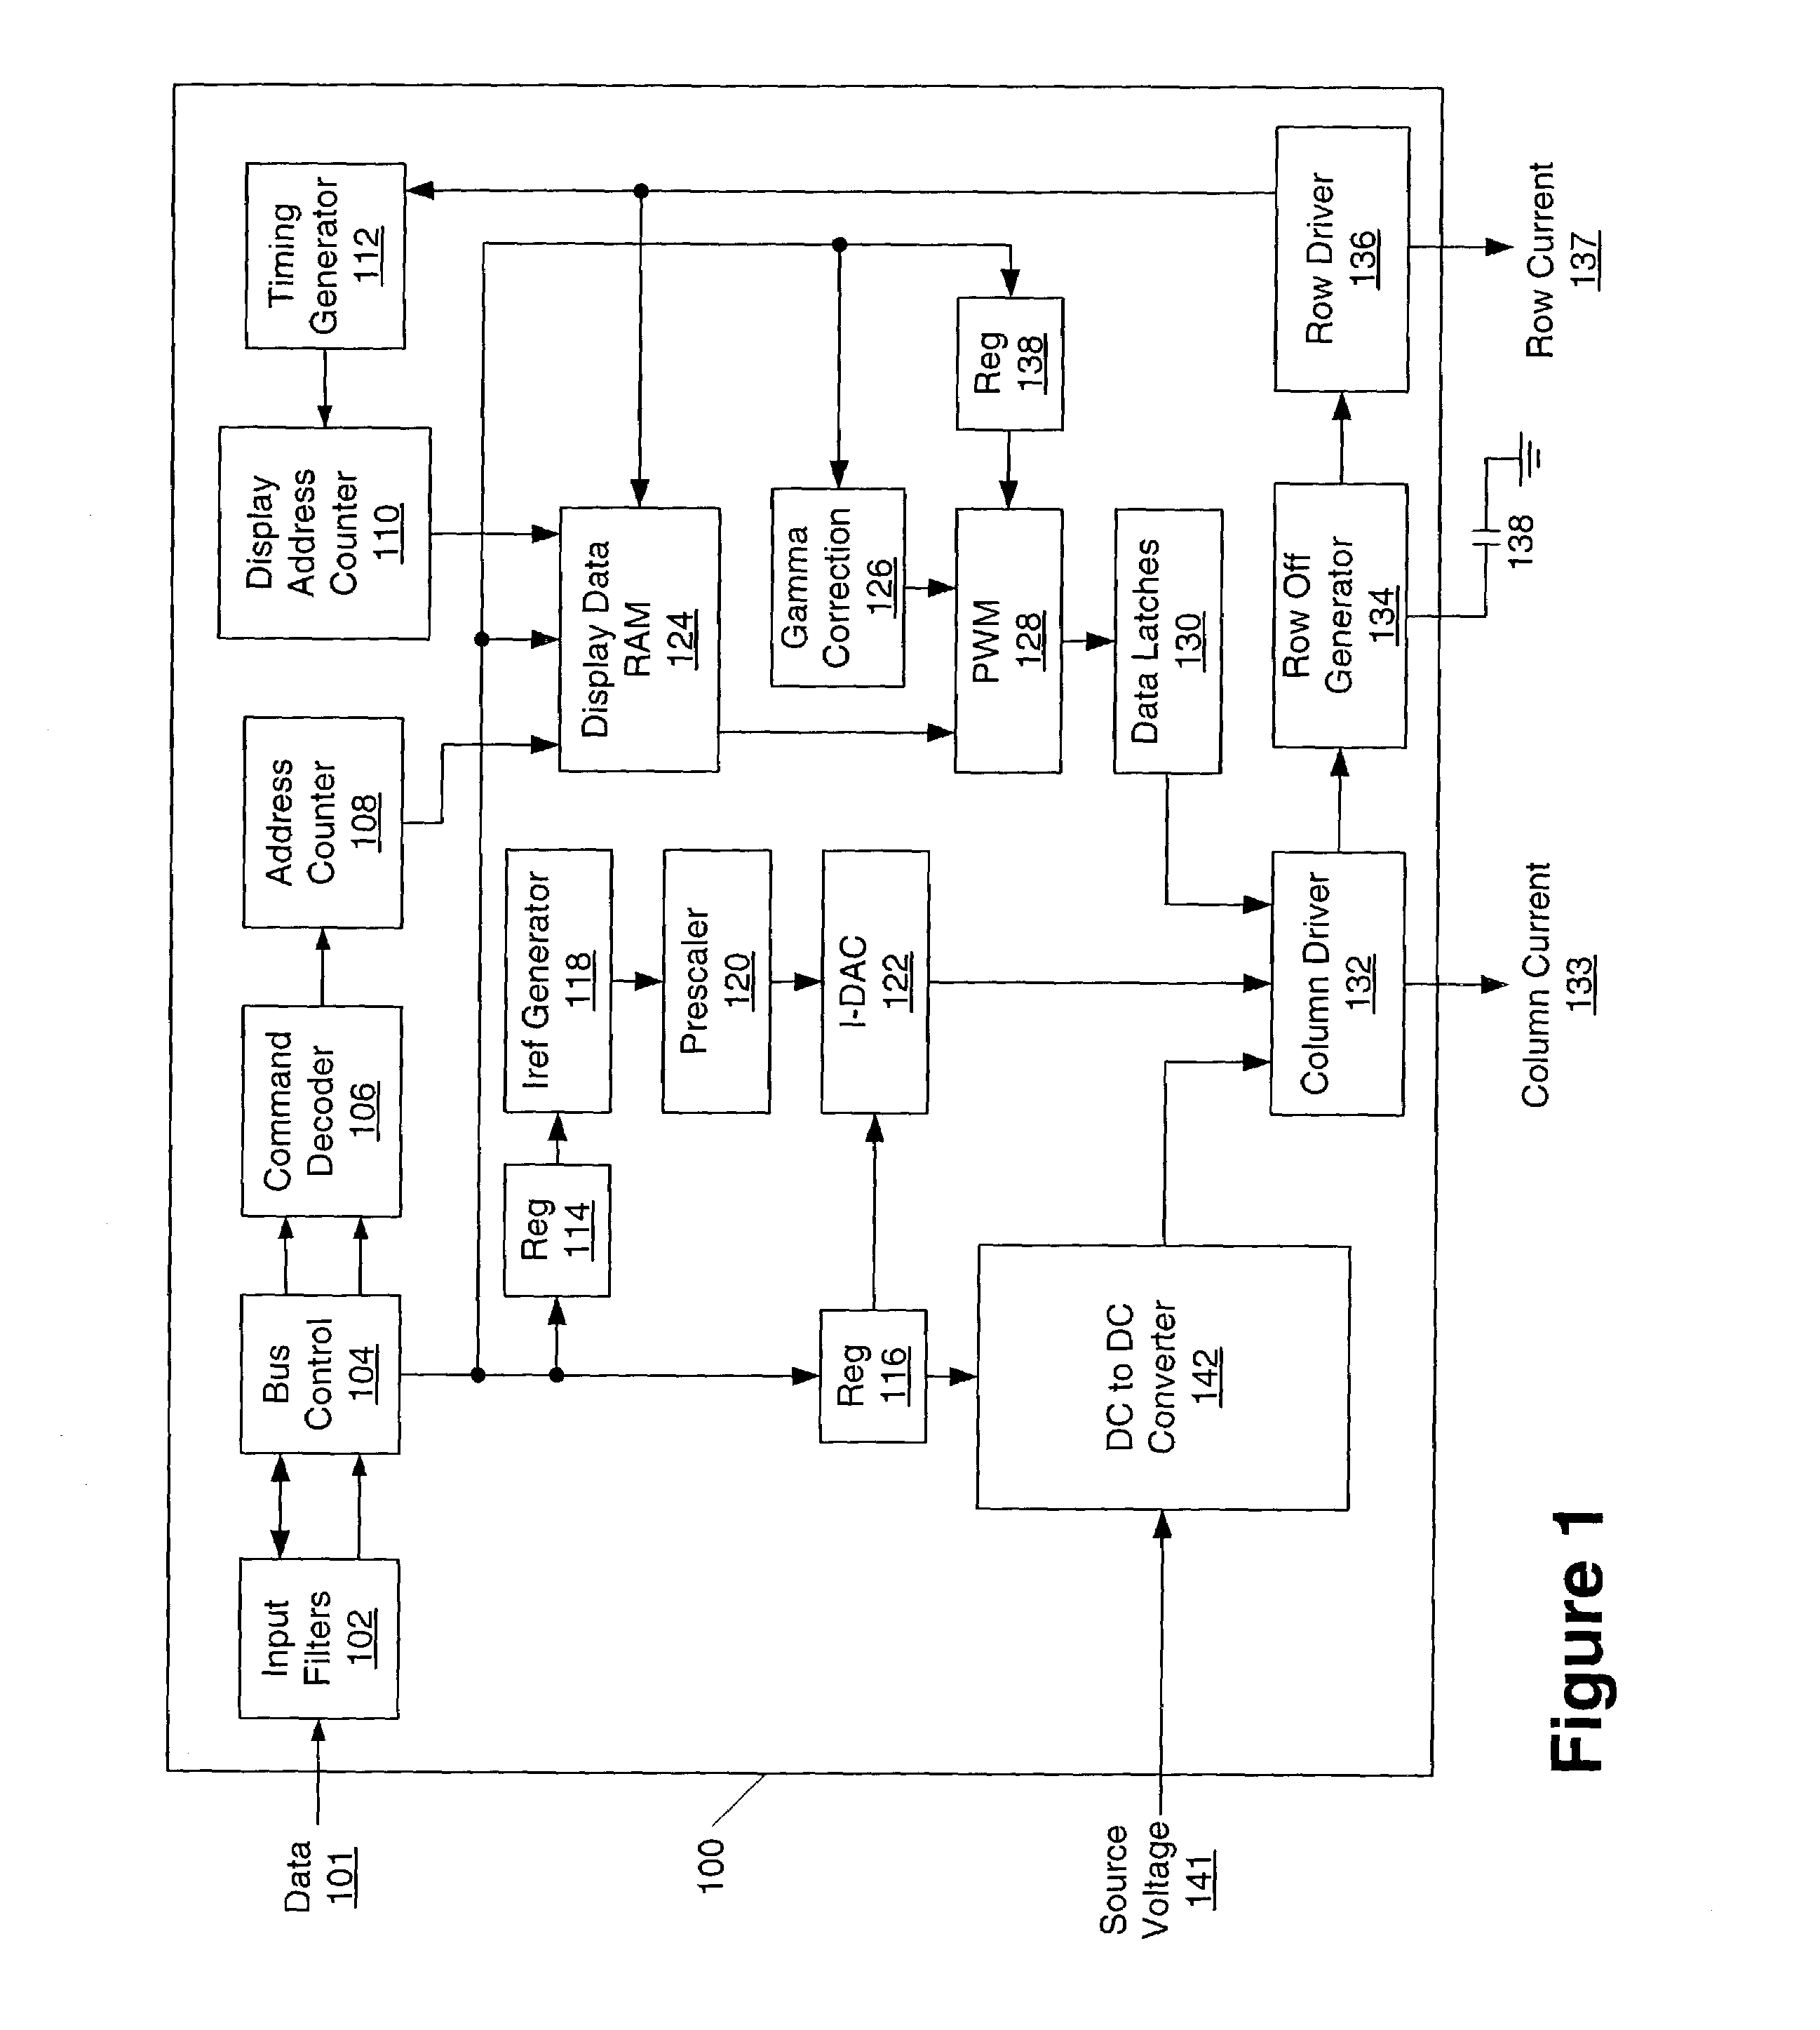 Method and apparatus for driving light emitting polymer displays